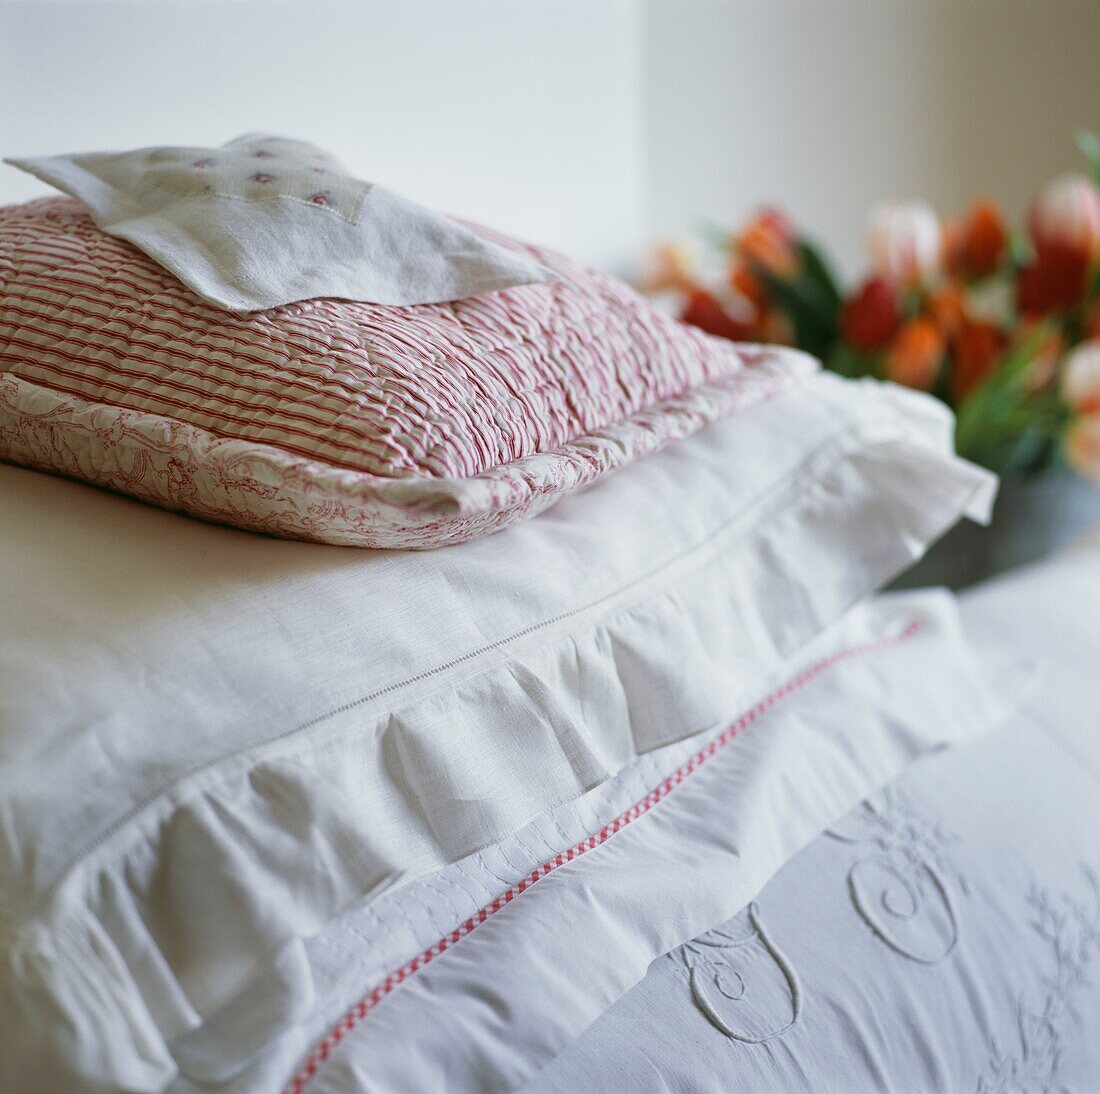 Pillows and cushions in white linen